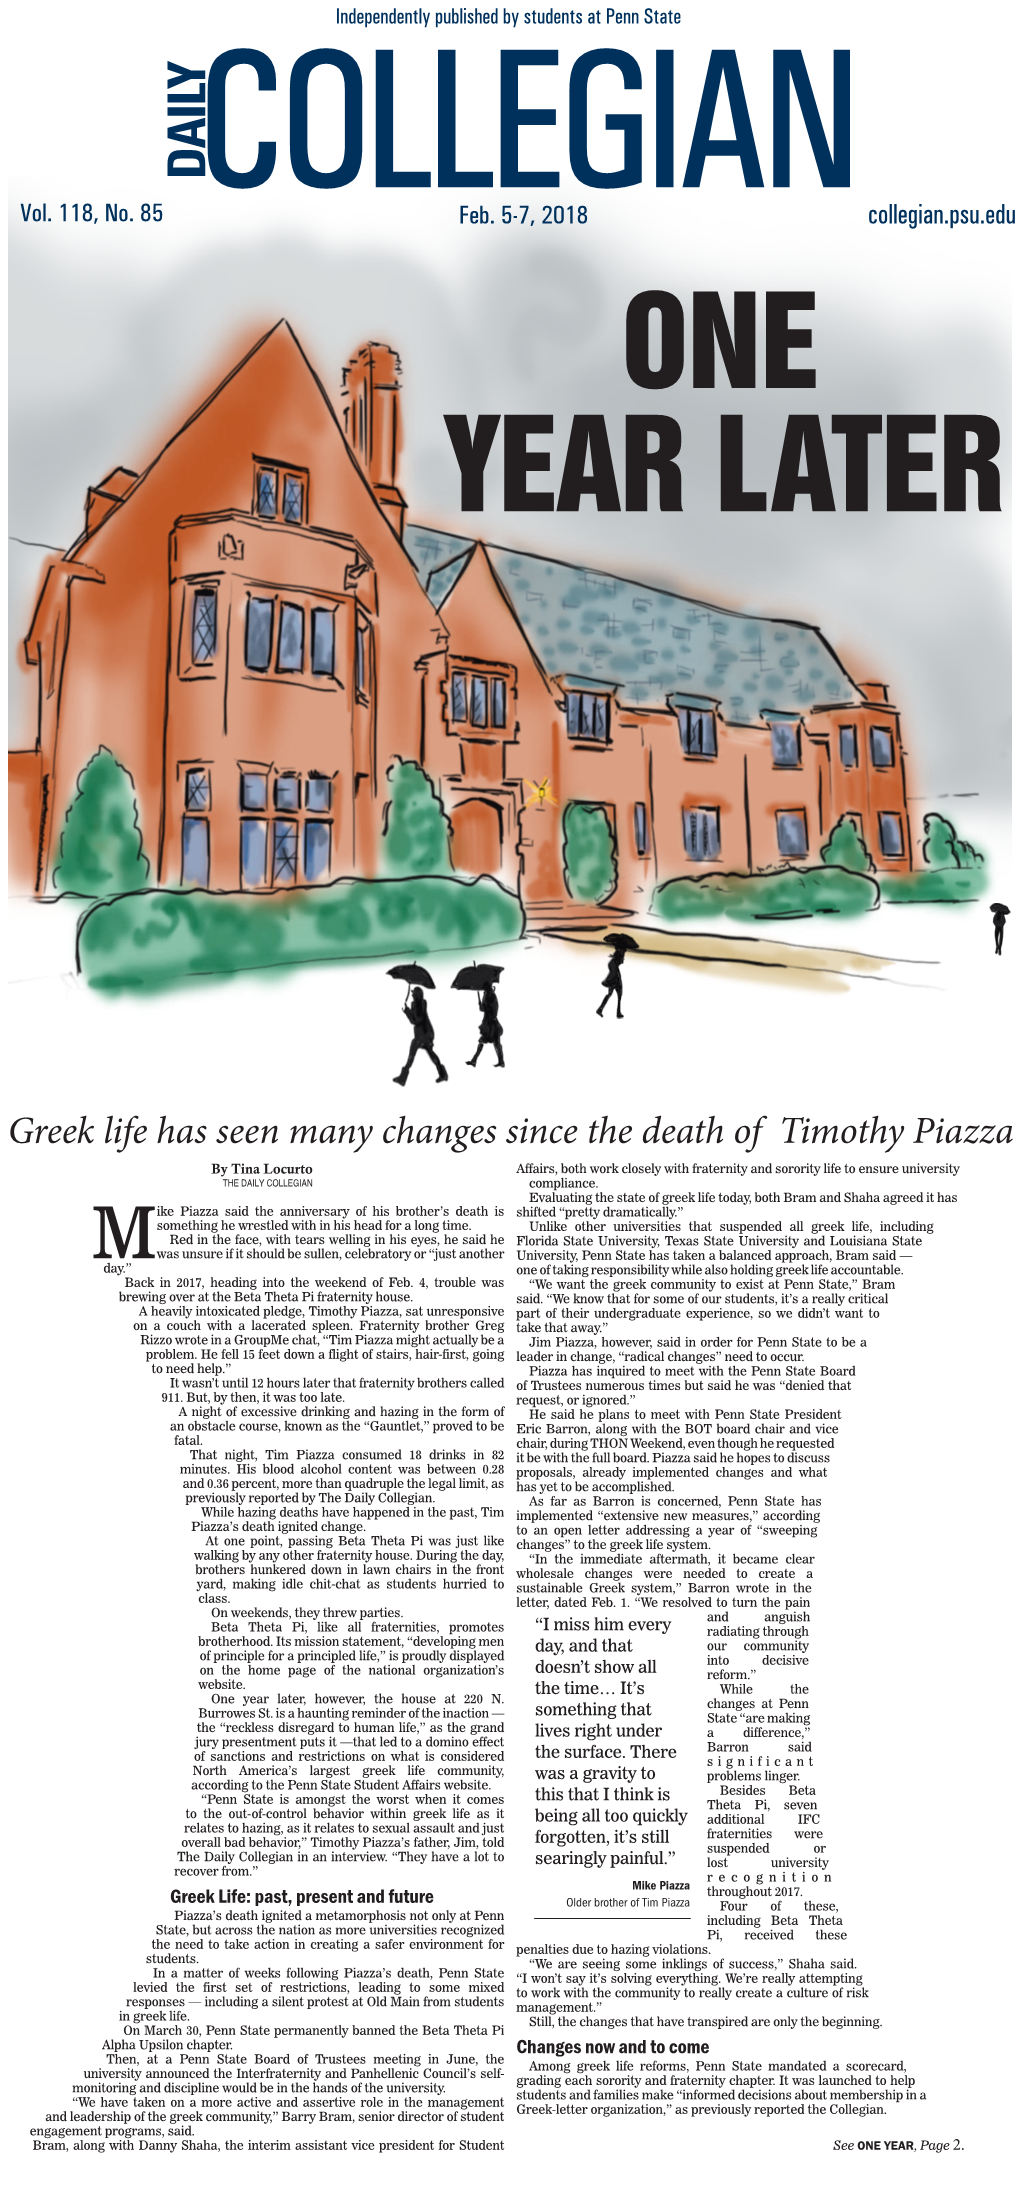 Greek Life Has Seen Many Changes Since the Death of Timothy Piazza